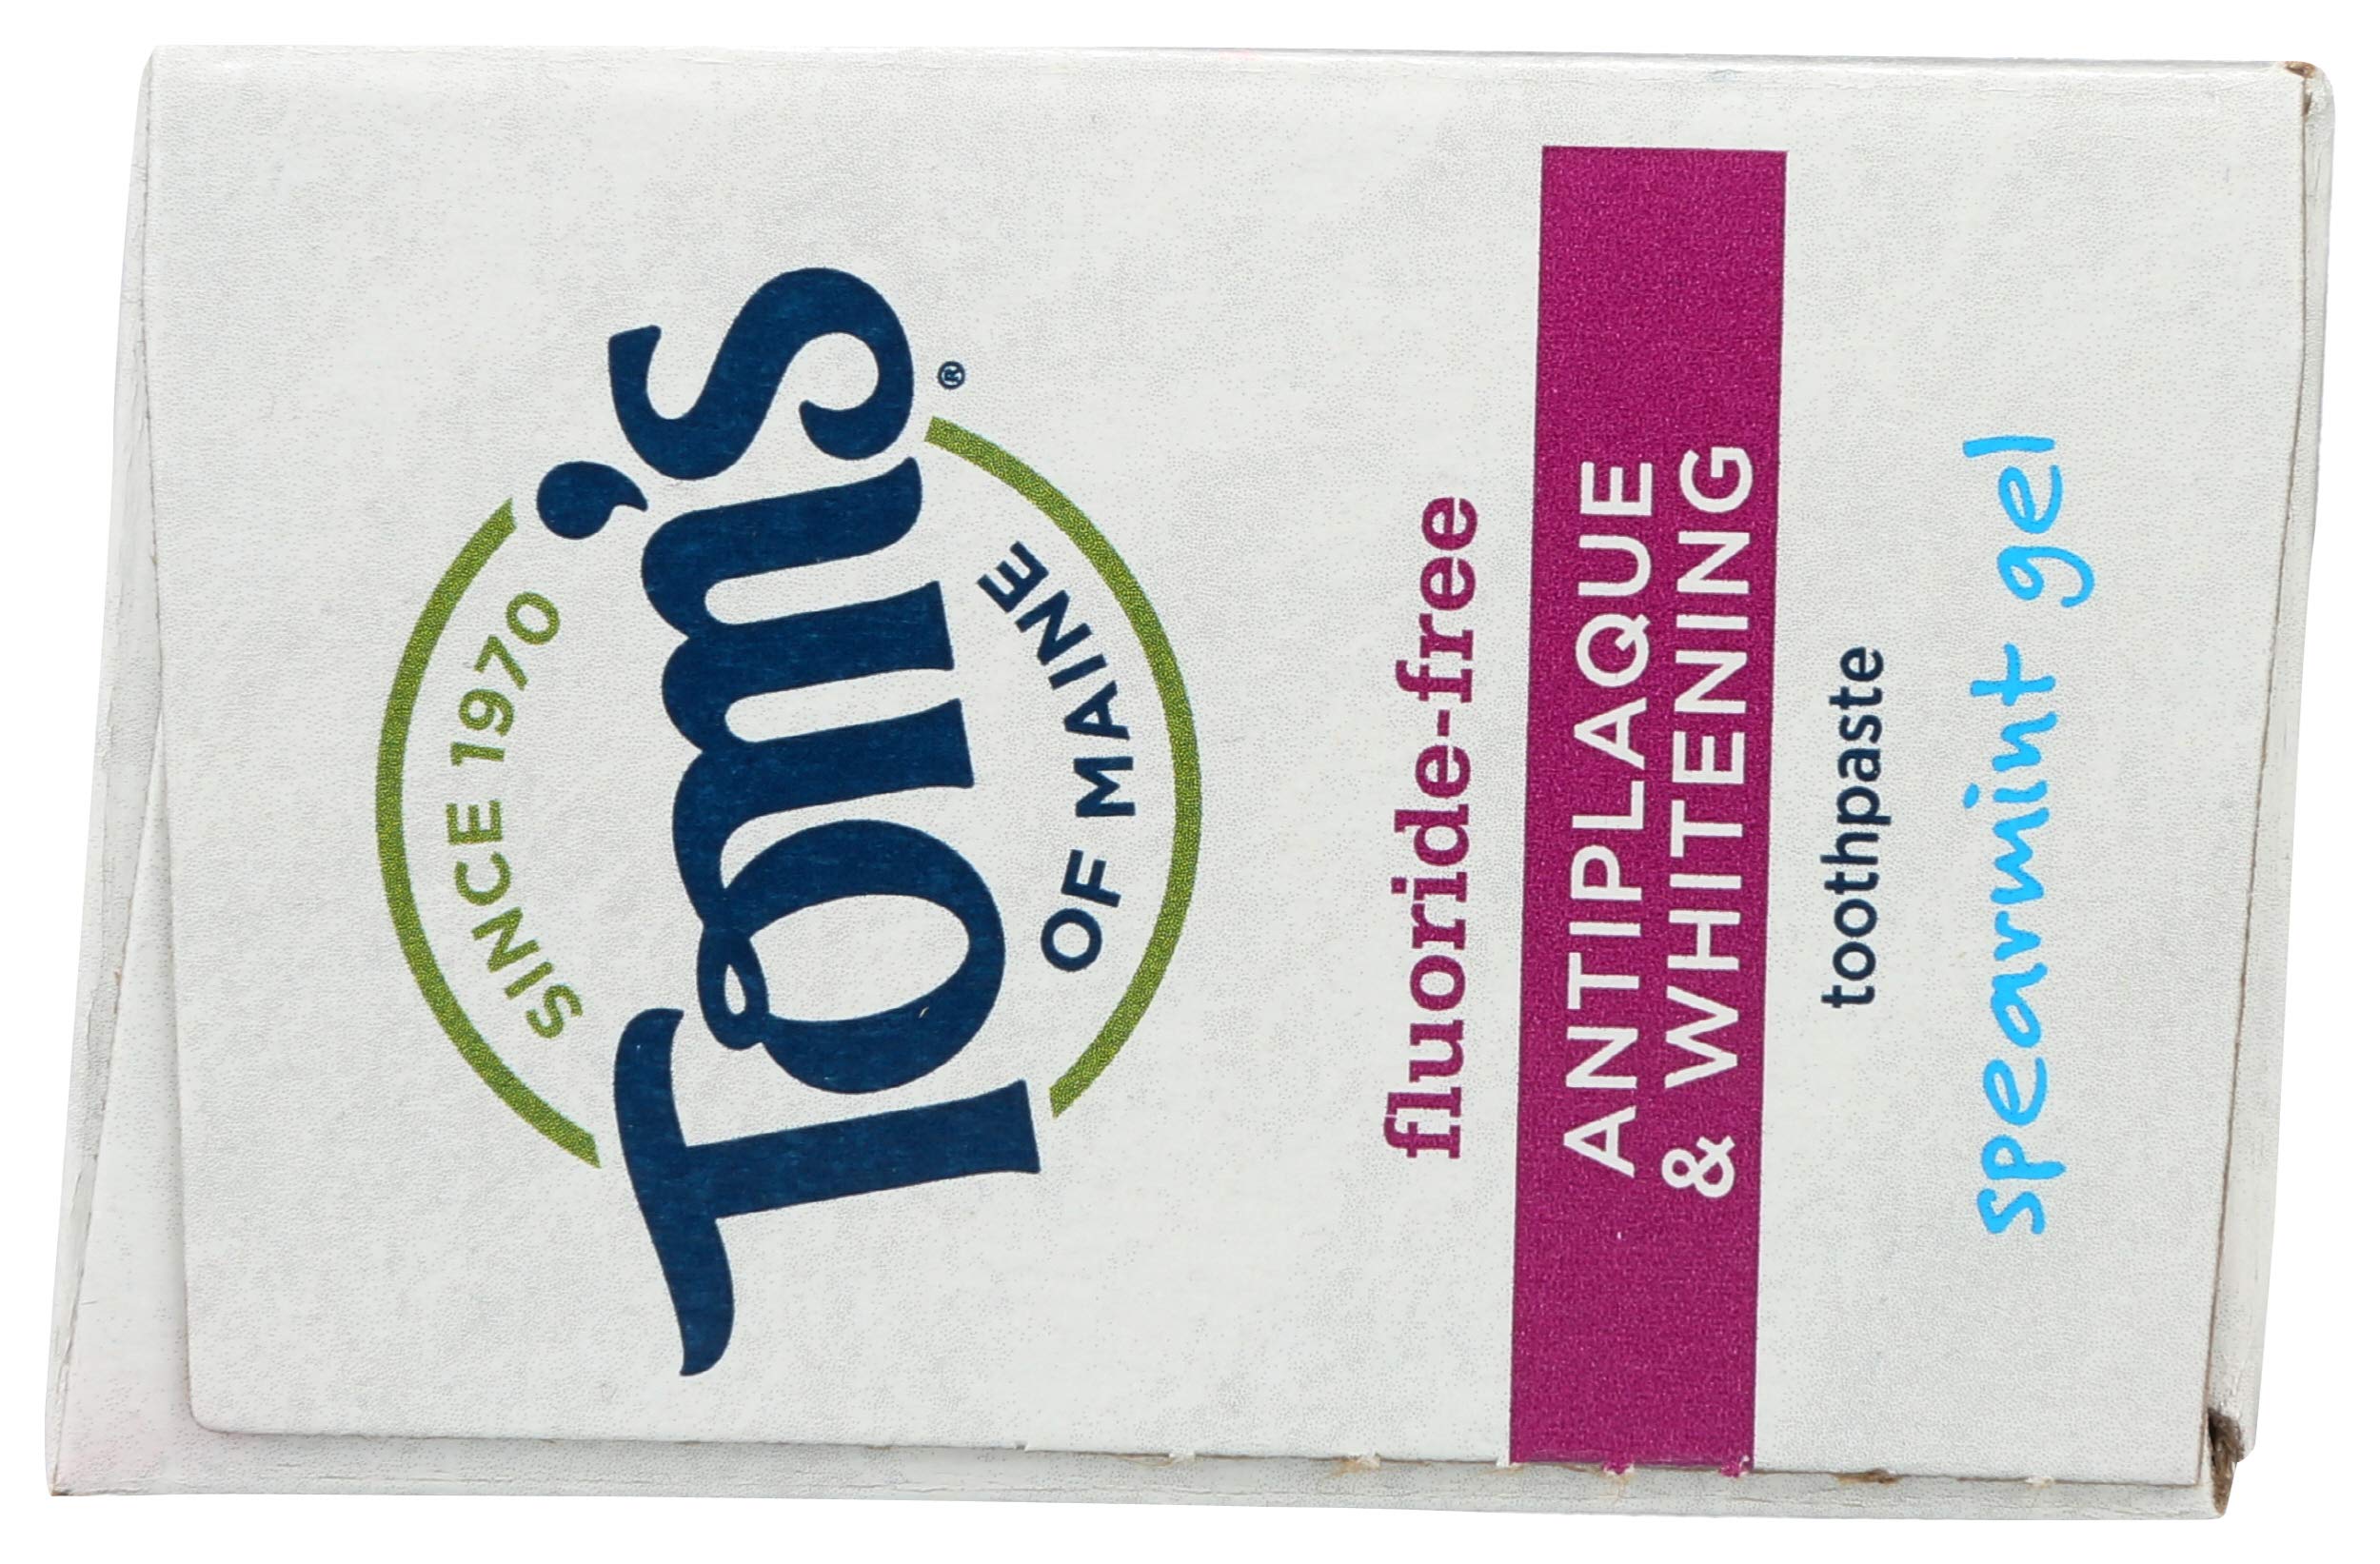 Tom's of Maine, Fluoride Free Antiplaque & Whitening Toothpaste - Spearmint Gel, 4.7 Ounce